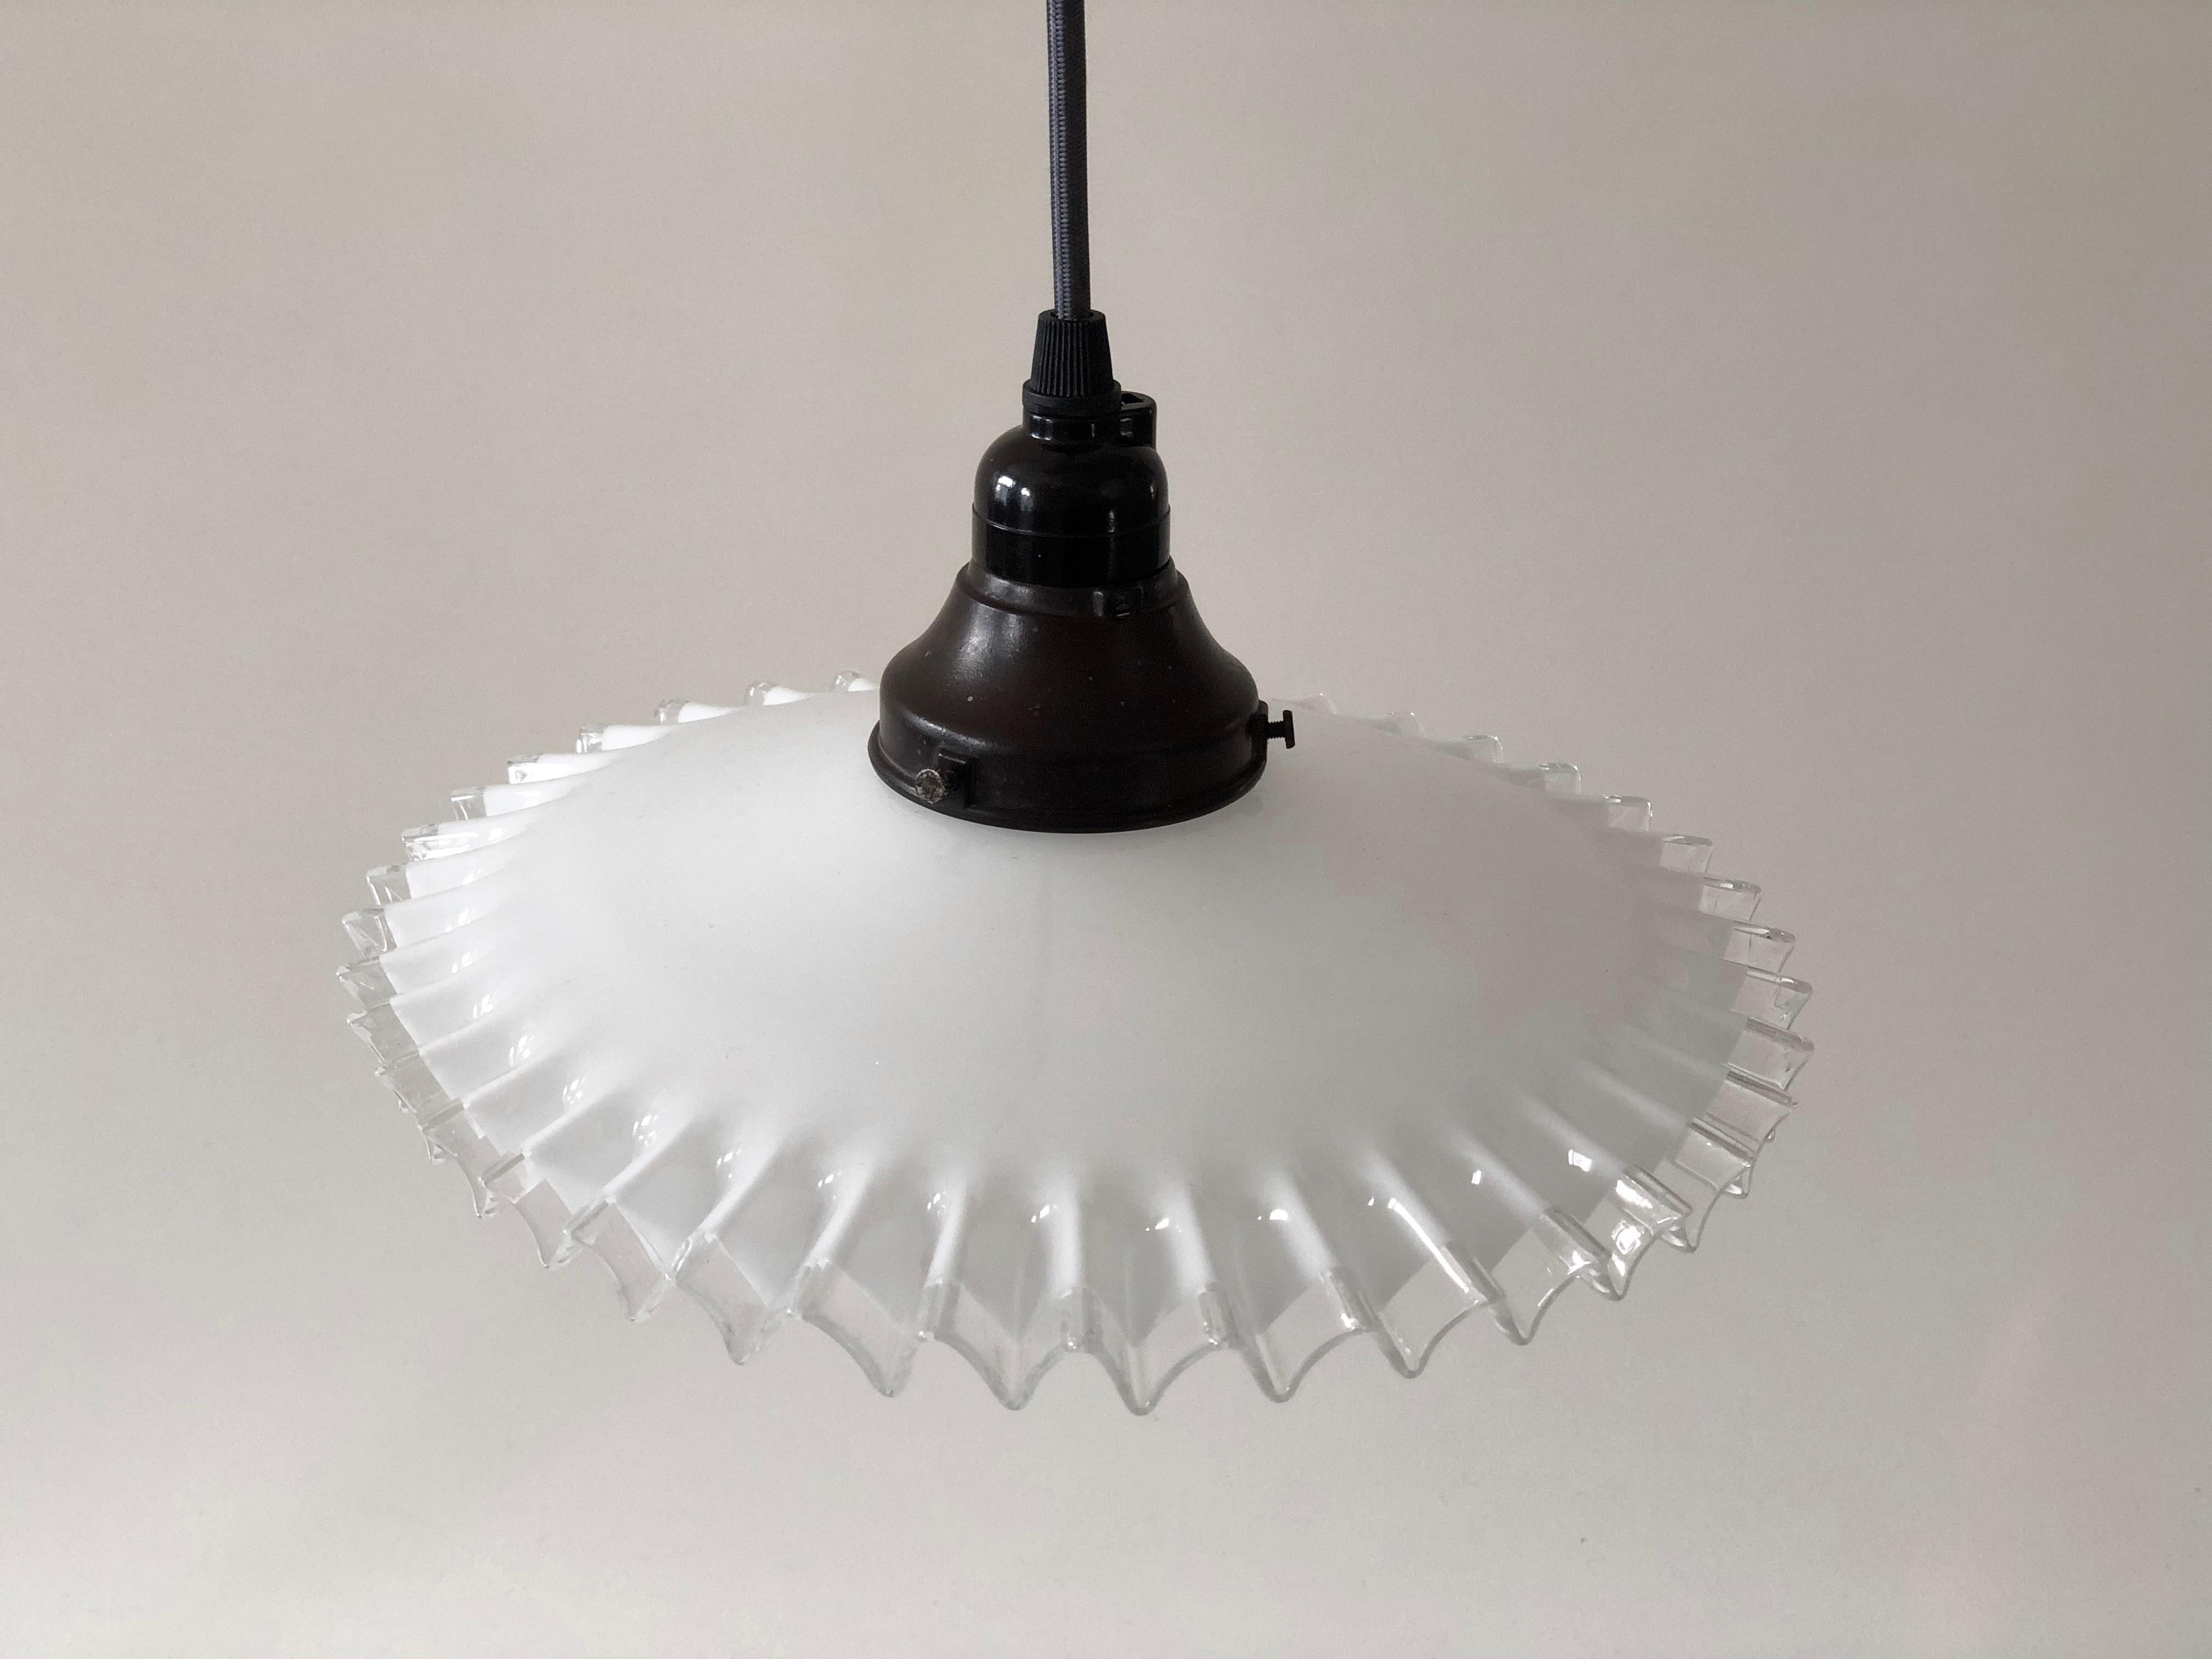 Counterweight Pendant Lamp, 1900, Made from Porcelain and Handmade Glass For Sale 2